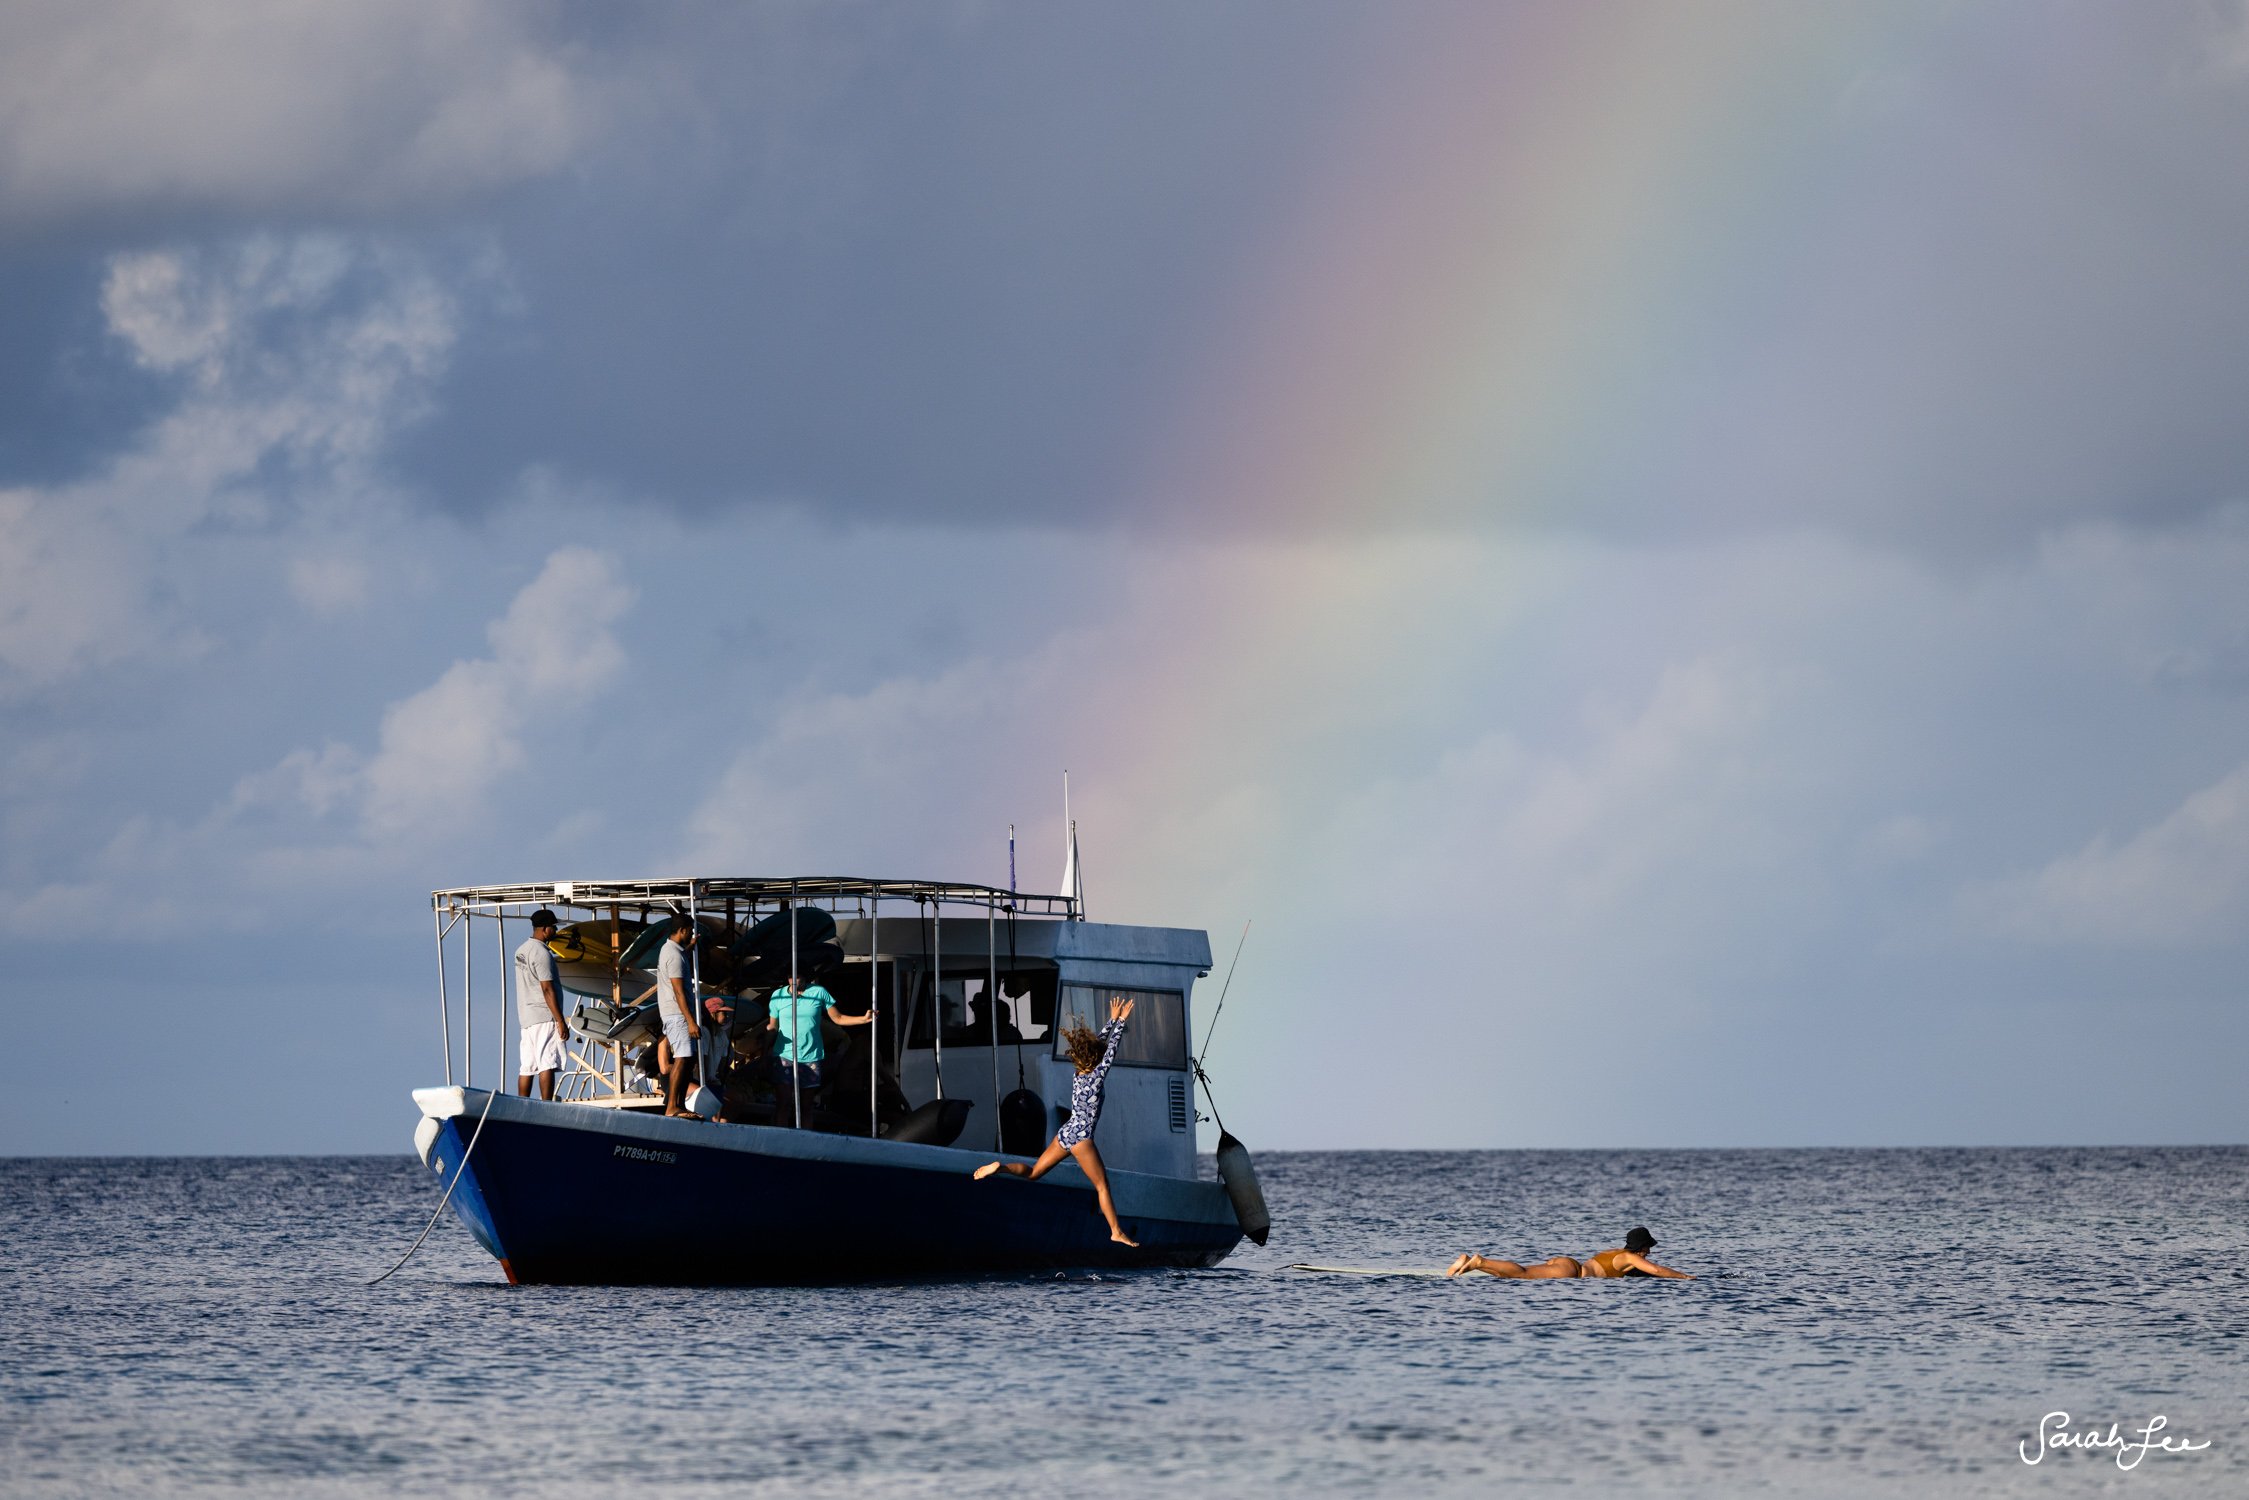 Surf dhoni boat under a rainbow in the Maldives